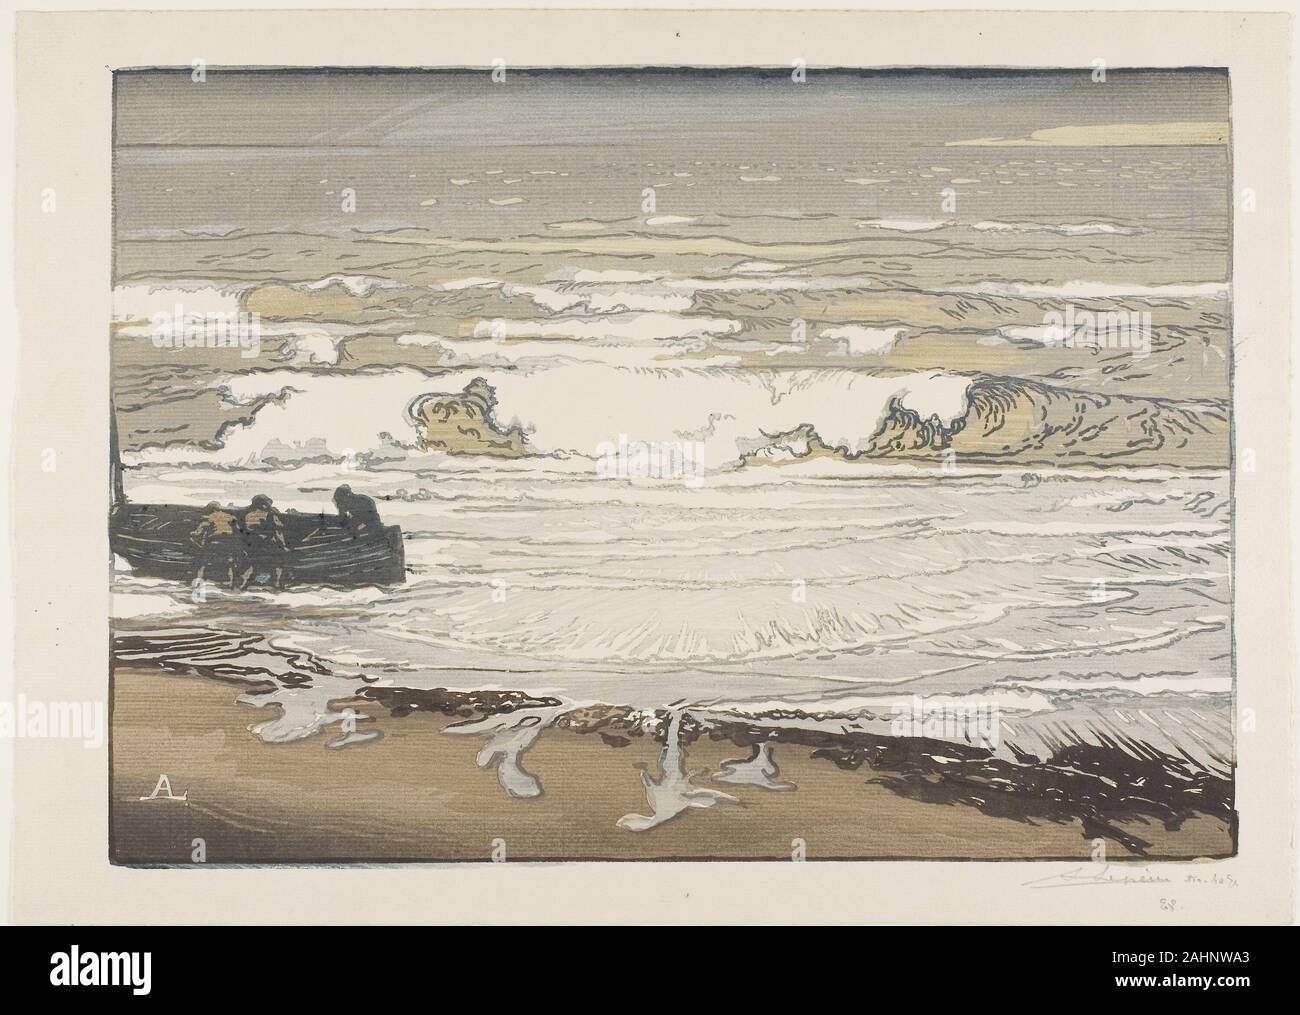 Louis Auguste Lepère. Breaking Waves, September Tide. 1901. France. Woodcut from three blocks in water-based colors on cream laid paper Louis-Auguste Lepére began his career as a commercial wood engraver, but in 1885 he decided to begin making his own original woodcuts. Moved by Japanese prints exhibited at the 1888 Exposition Internationale de Blanc et Noir and the 1889 Exposition Universelle, Lepére experimented with the color woodcut process. Breaking Waves pays homage to the ocean imagery popular in the islands of Japan and integrates a diagonally recessed shoreline with a horizon line jus Stock Photo